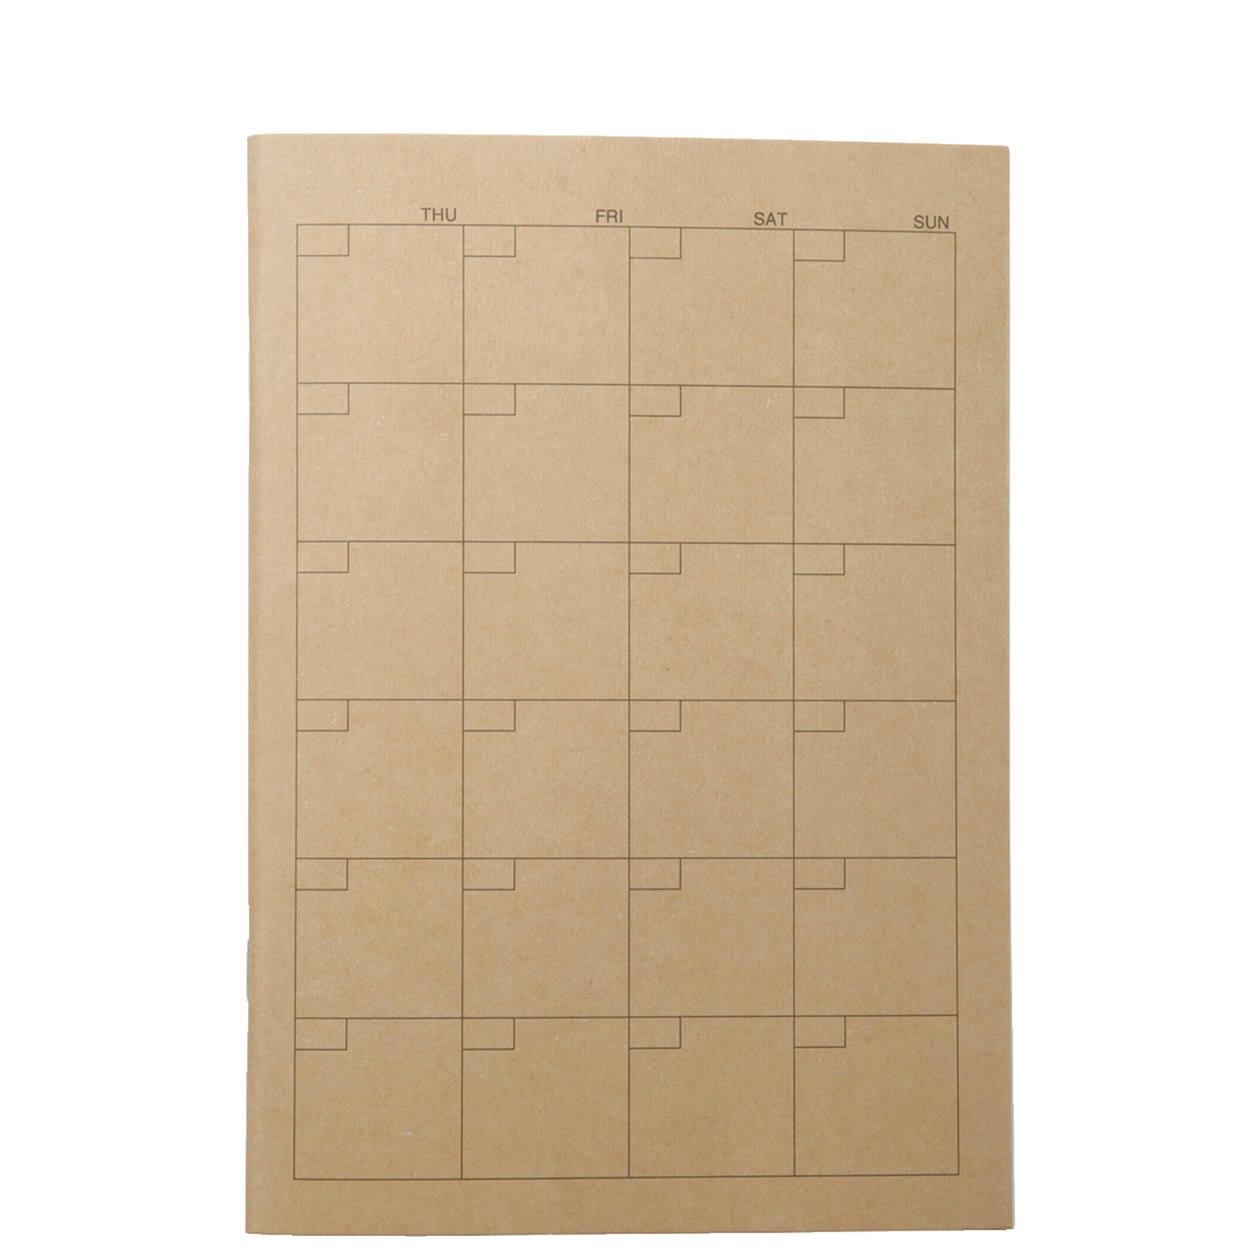 A5 SCHEDULE Monthly Weekly Notebook-Muji-monthly weekly,muji,notepad,planting tree,schedule,Stationery